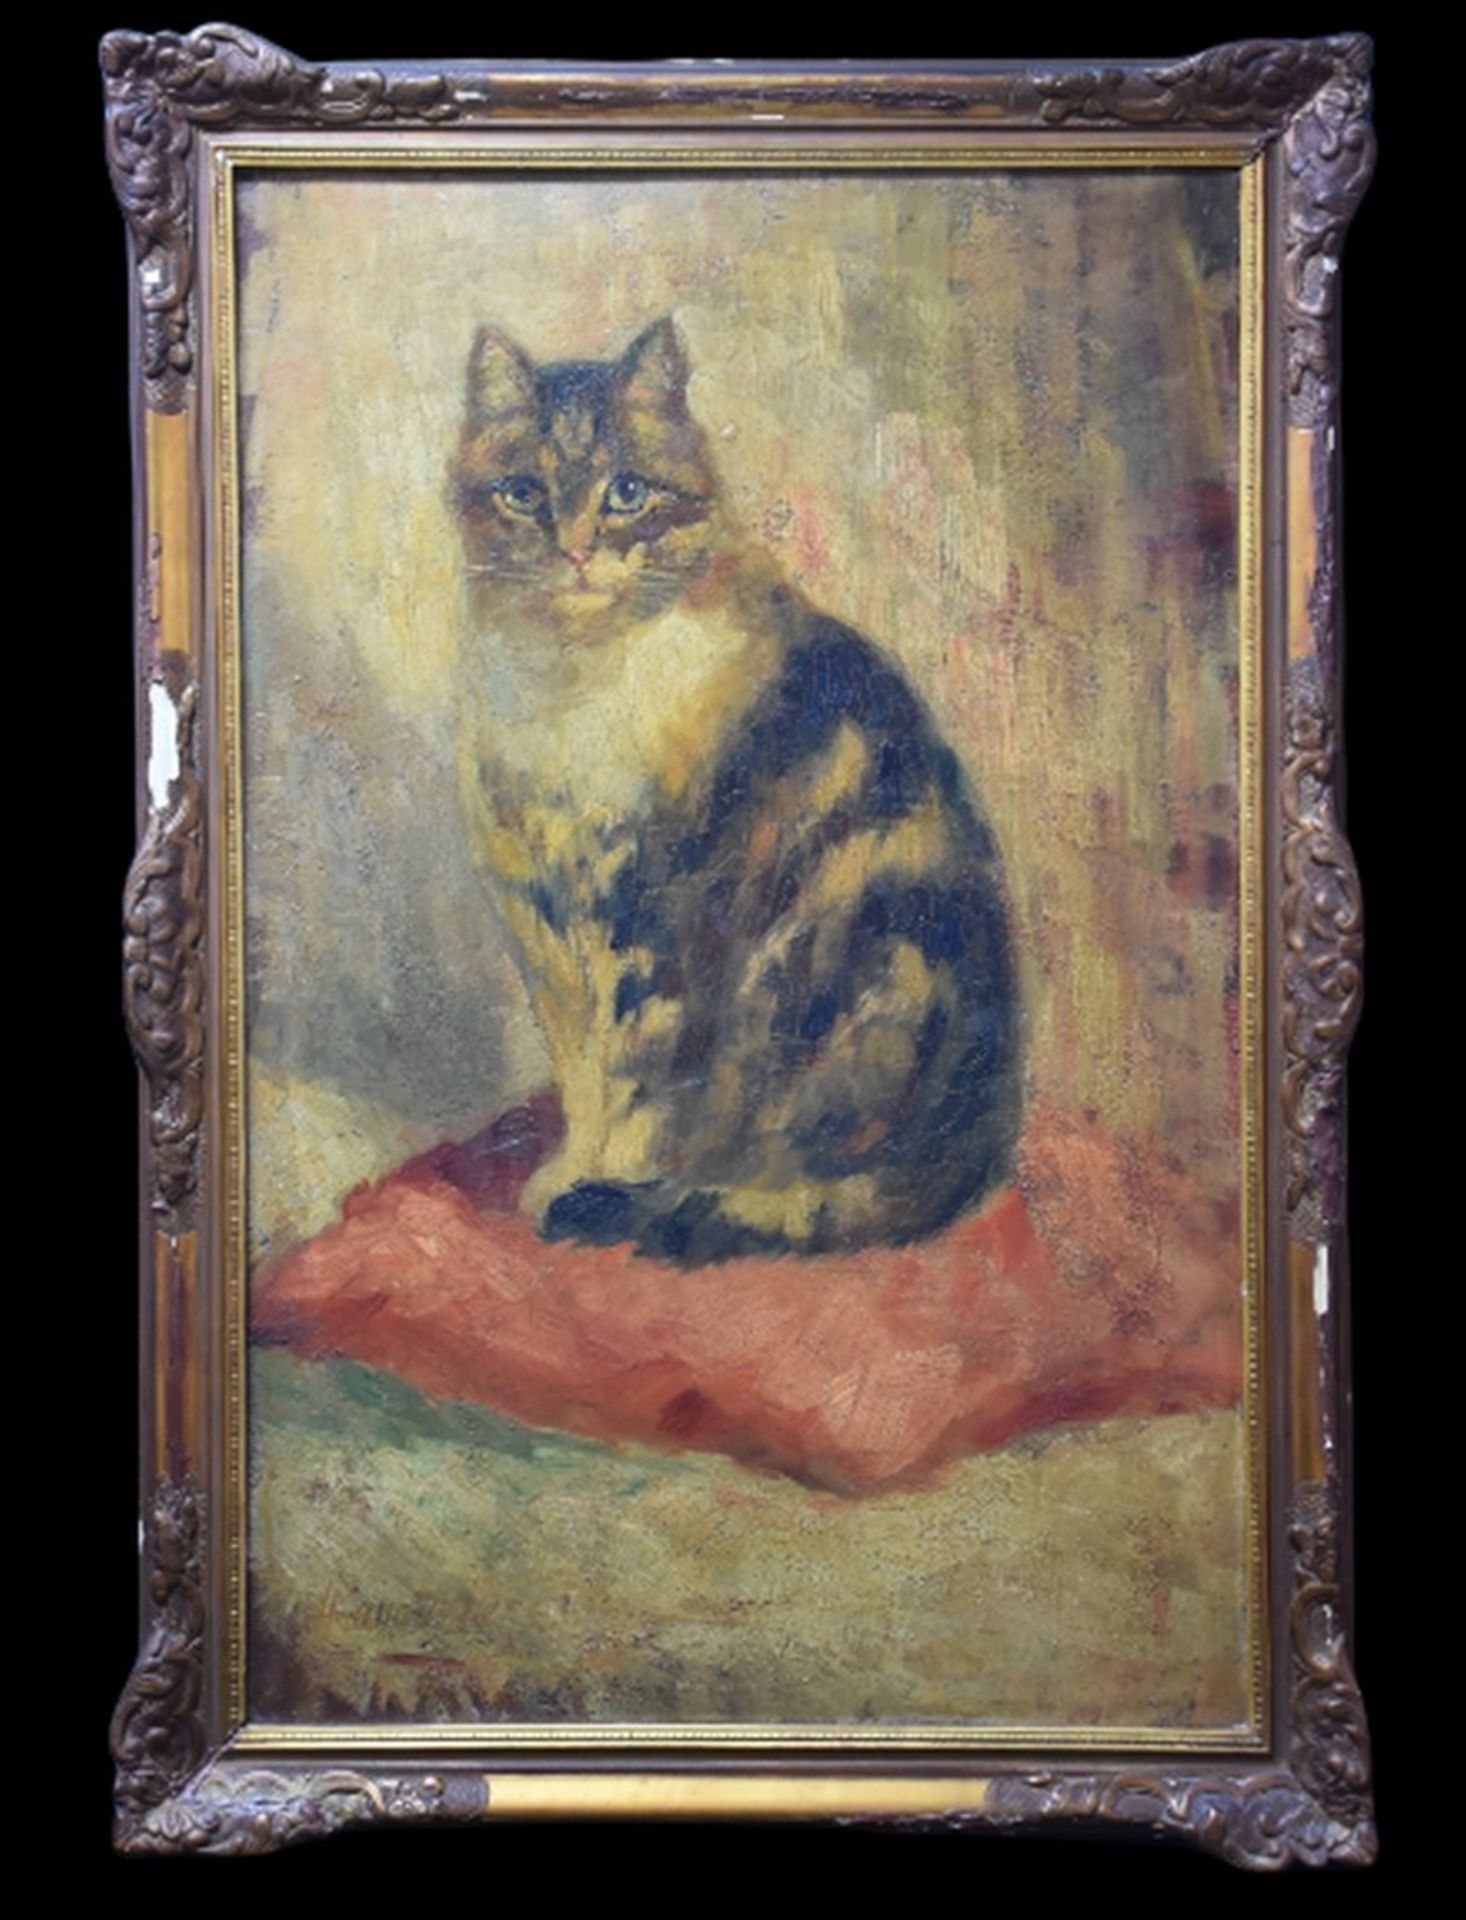 L. Manouriez (XIX). The cat on his red cushion. Oil on canvas. 71 cm x 45 cm. Chips in the frame.